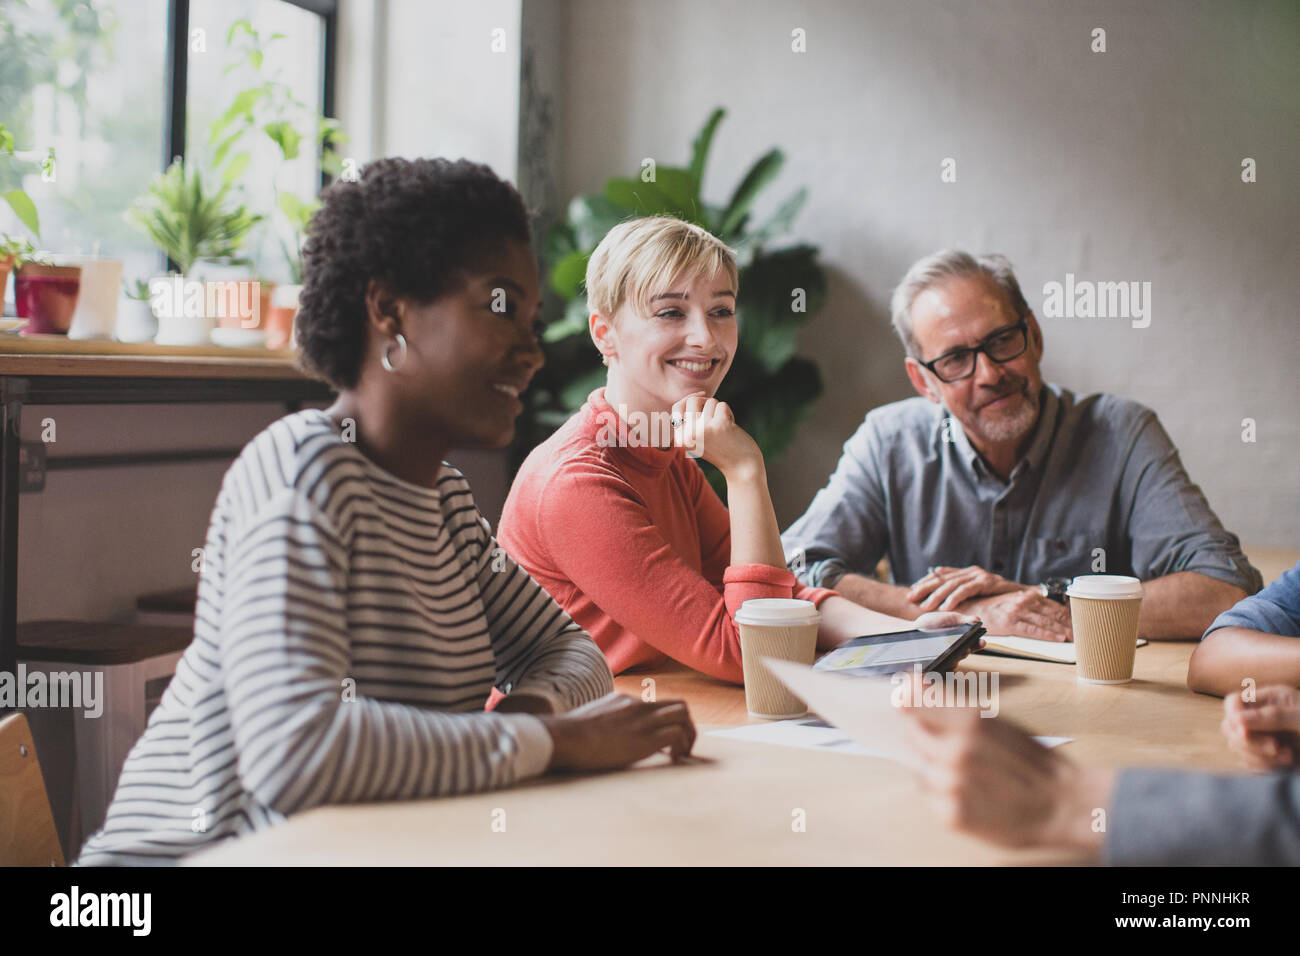 Group of coworkers having a meeting in a cafe Stock Photo